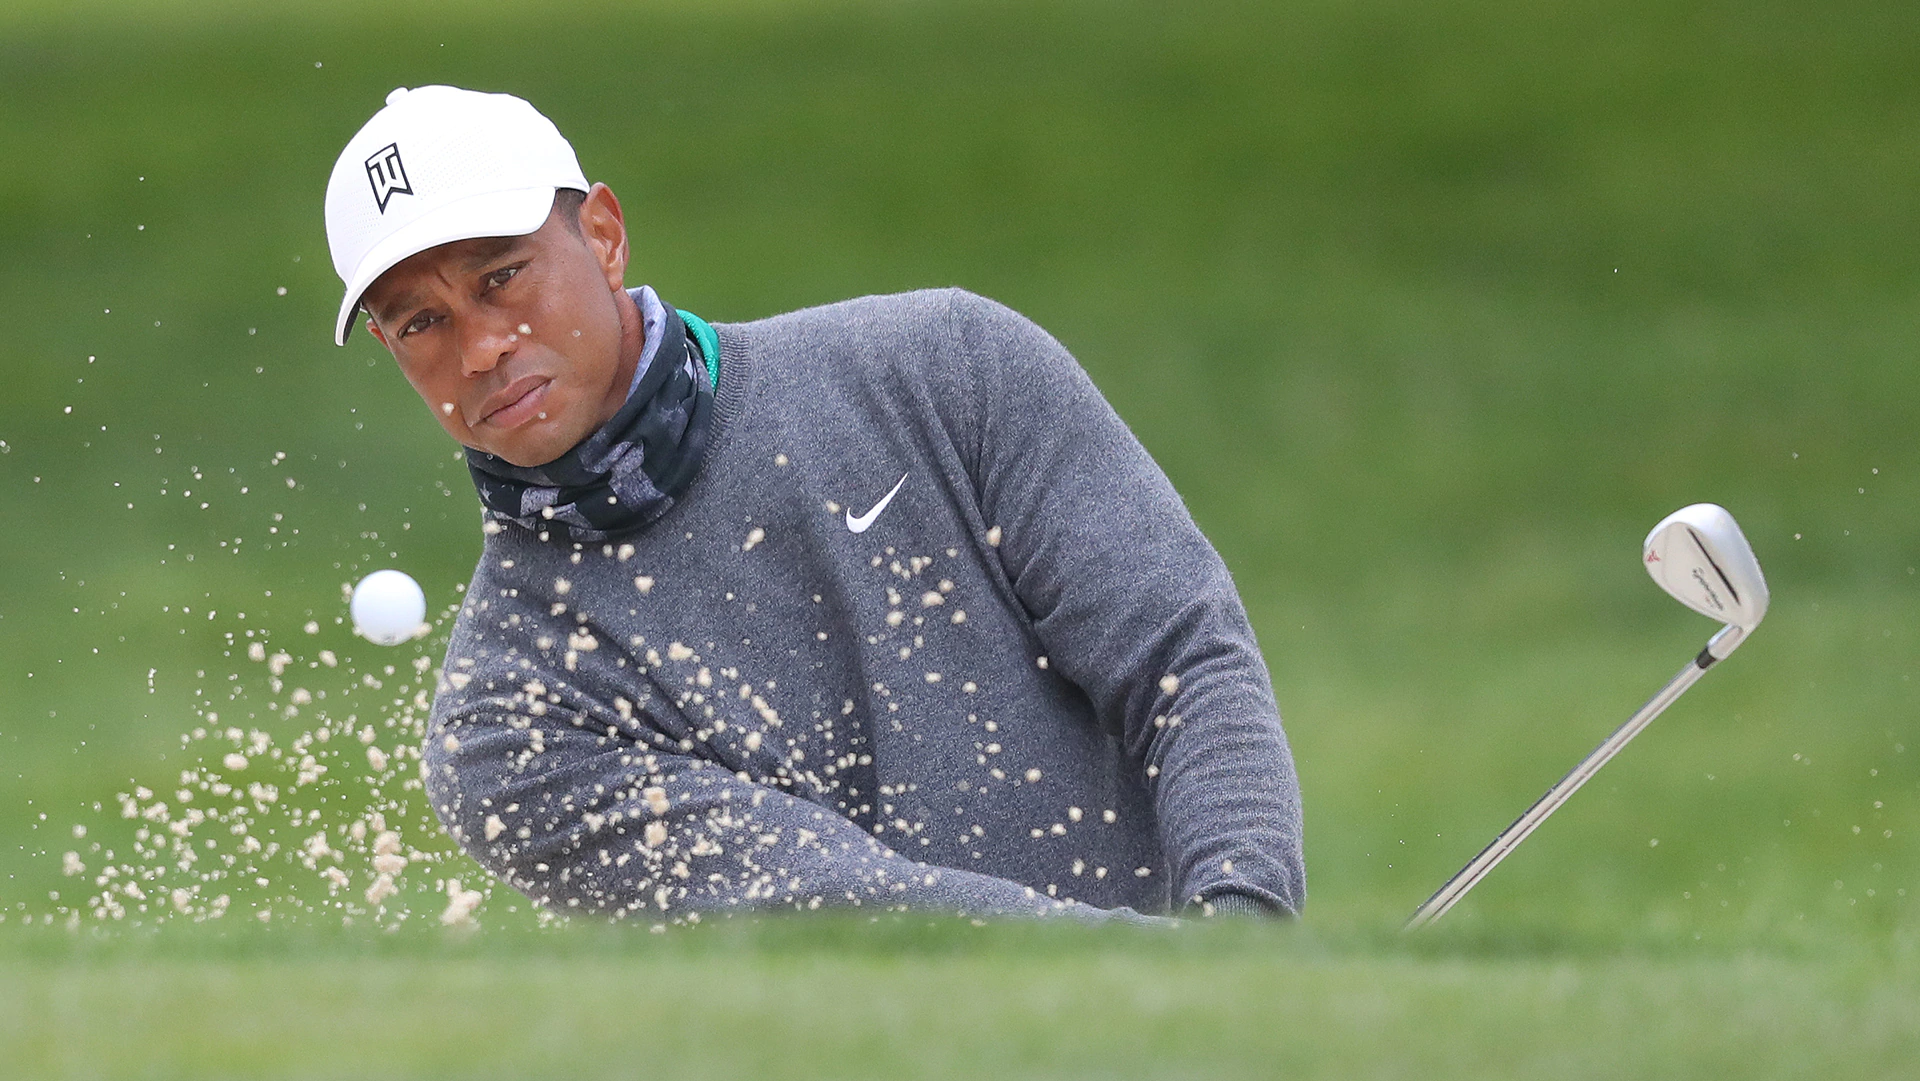 Tiger Woods watching his back as he preps for cool PGA Championship